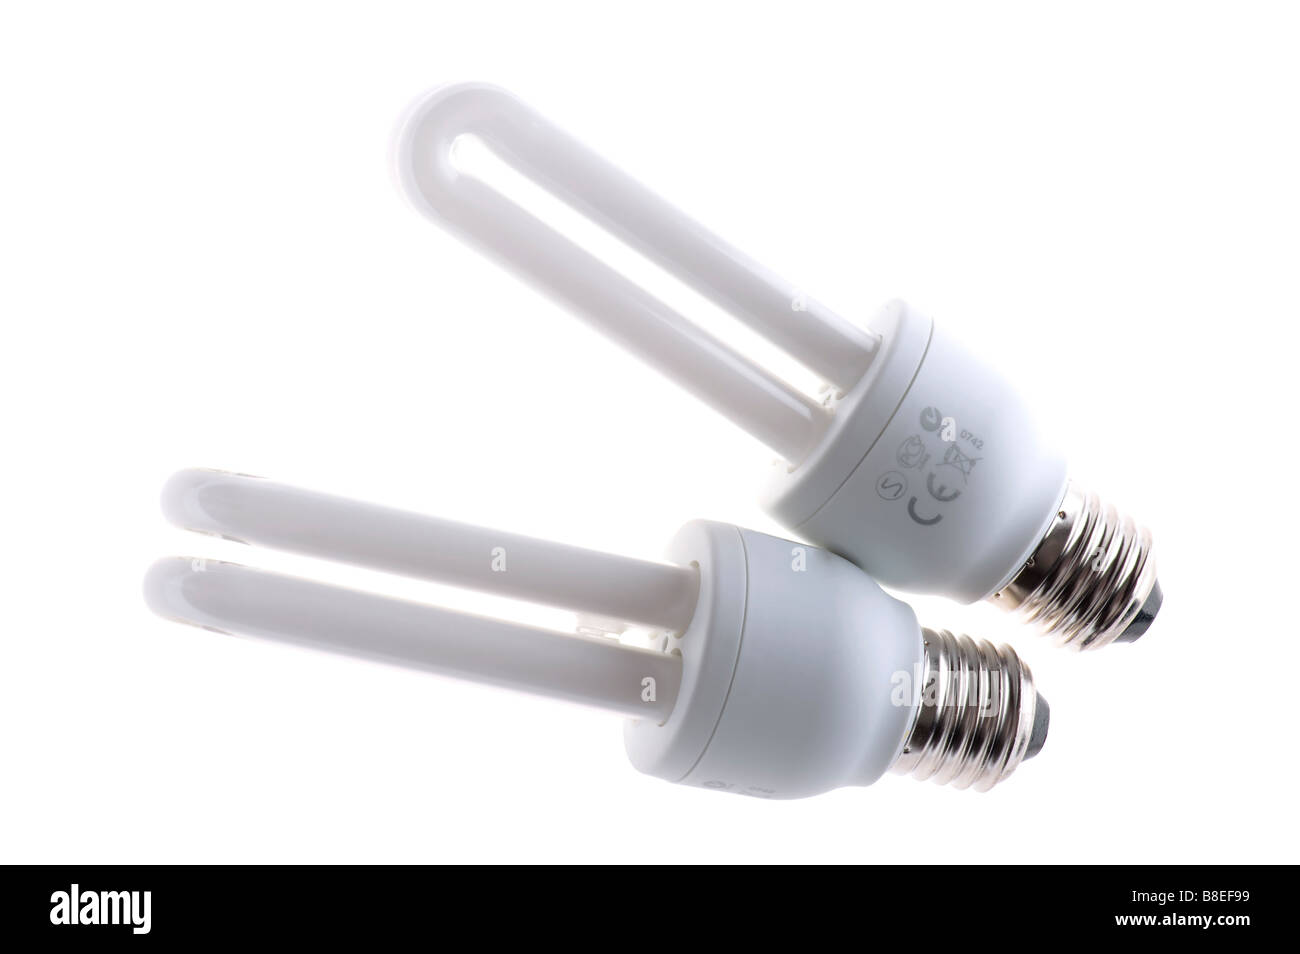 object on white compact florescent light bulb Stock Photo